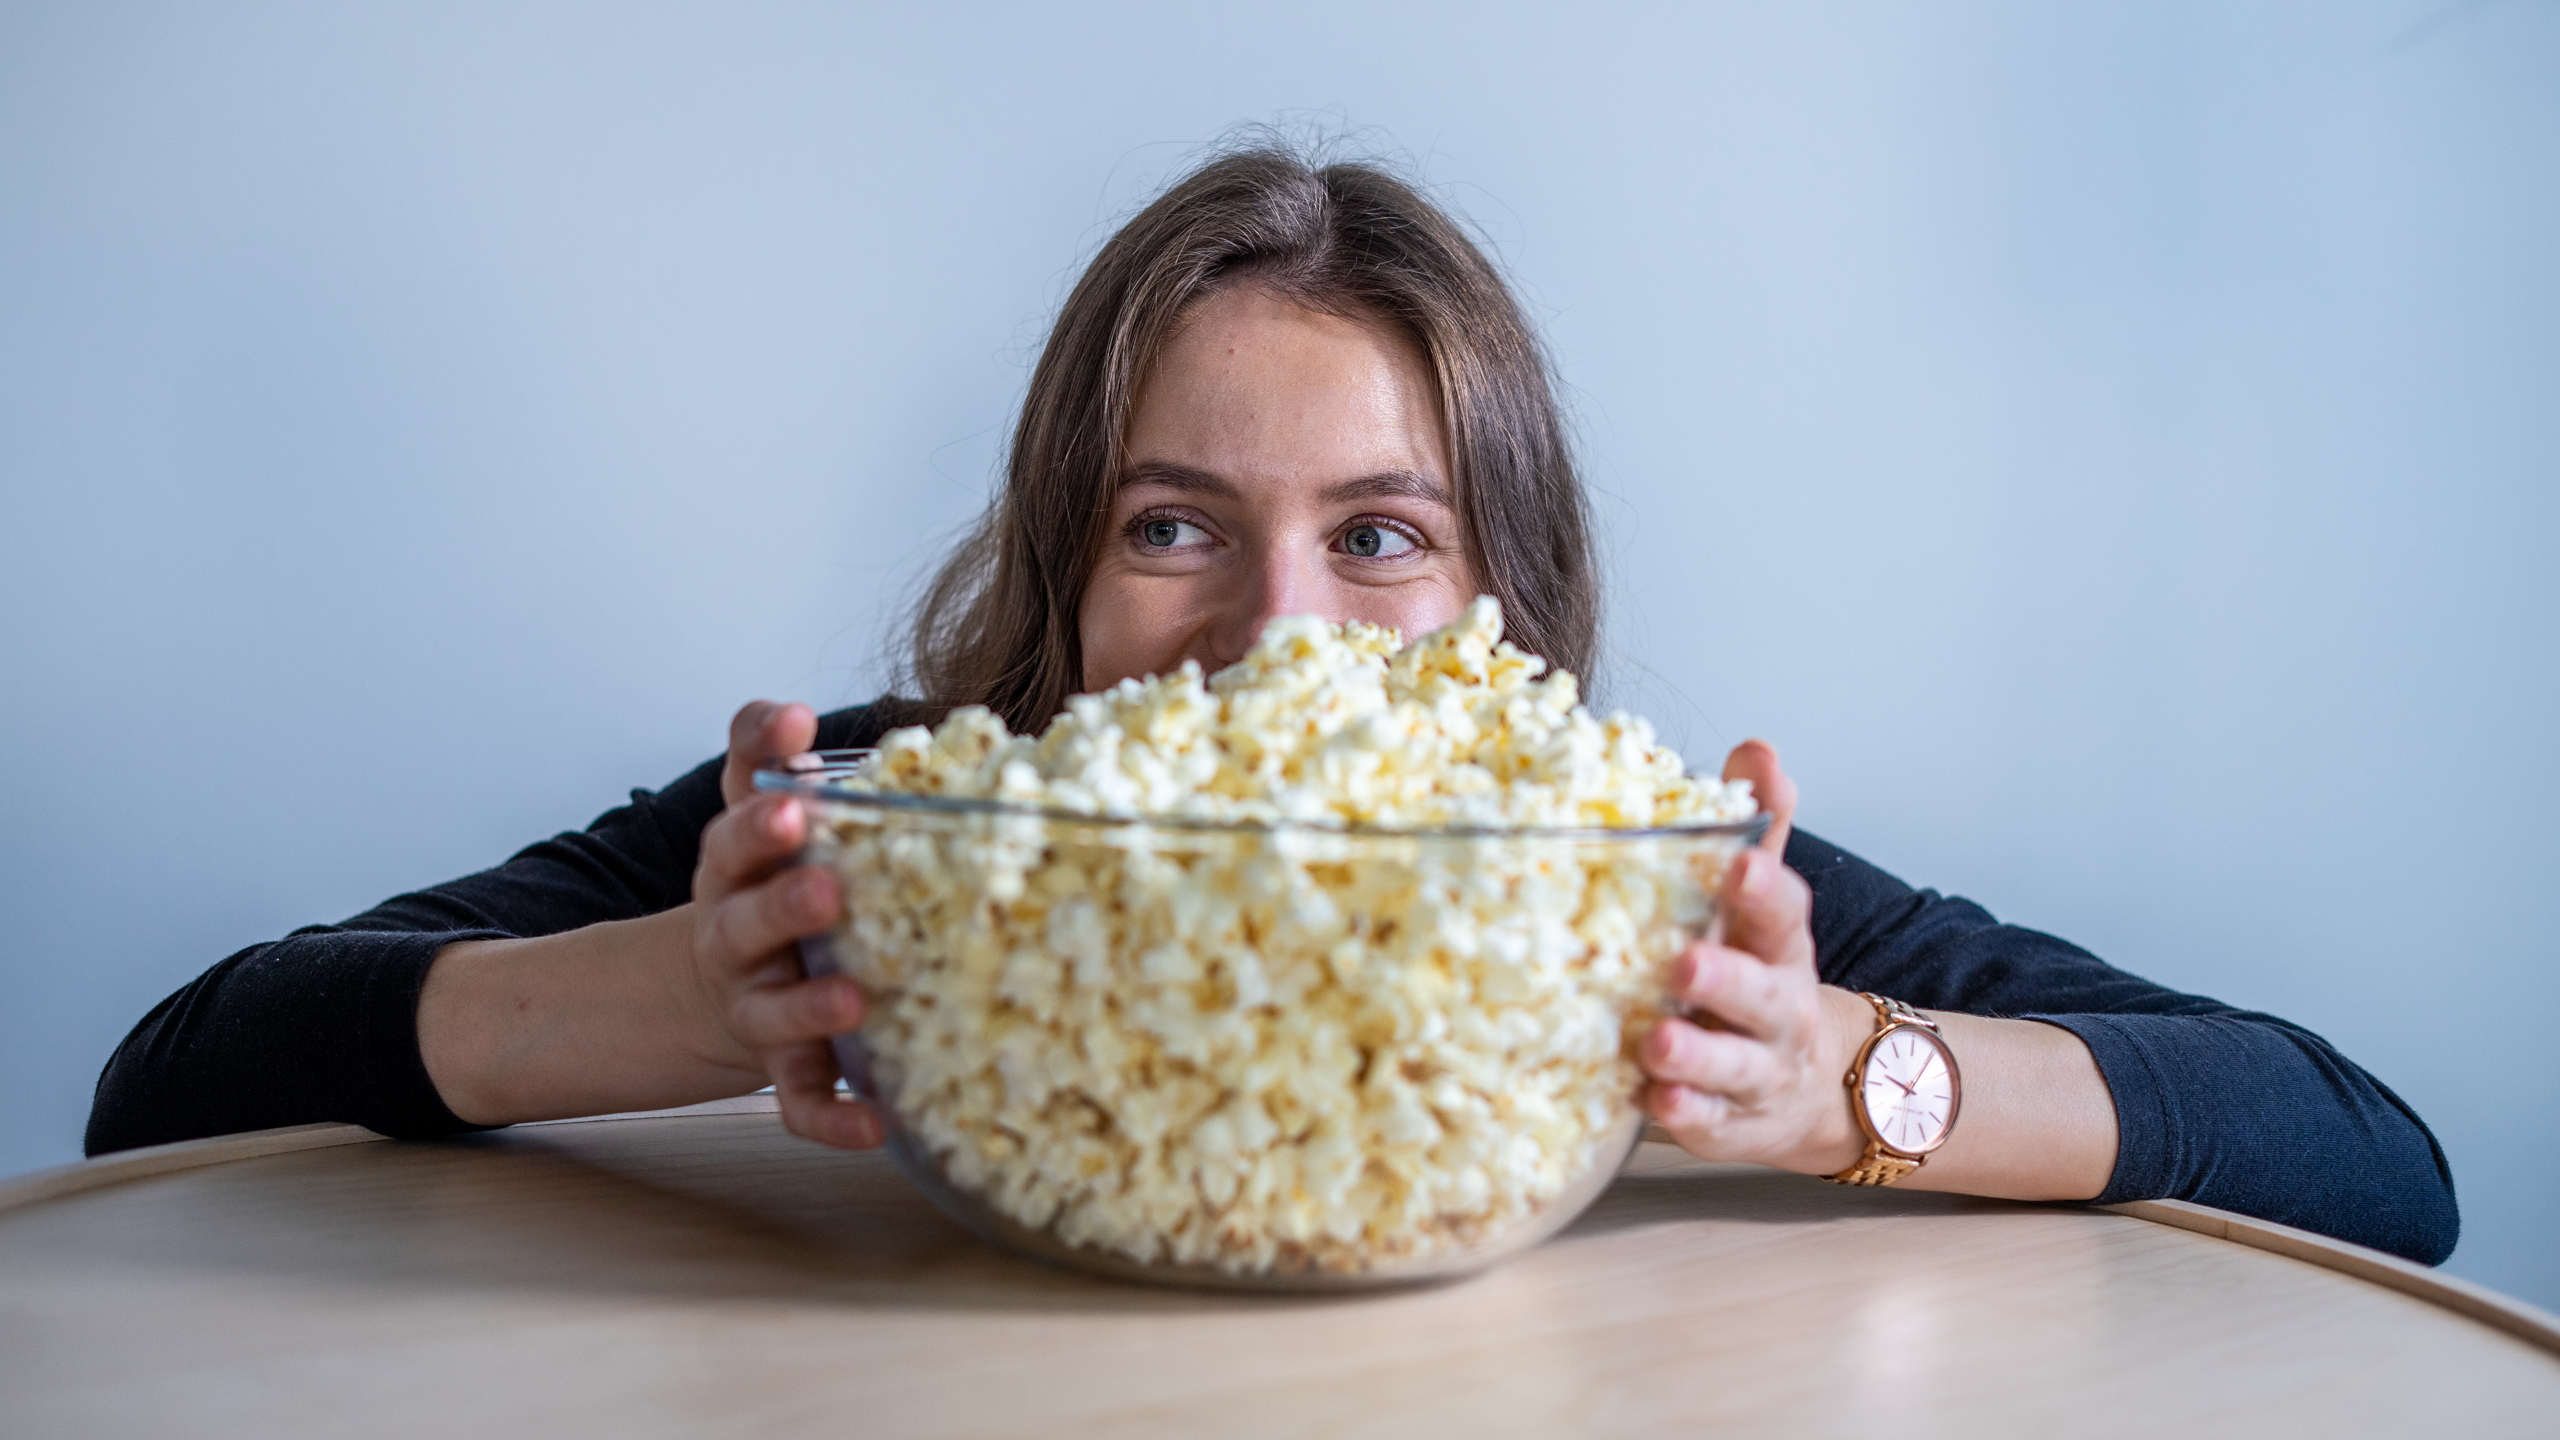 Žaneta, Sudolabs' recruiter, hiding behind a bowl of popcorn with a smile on her face